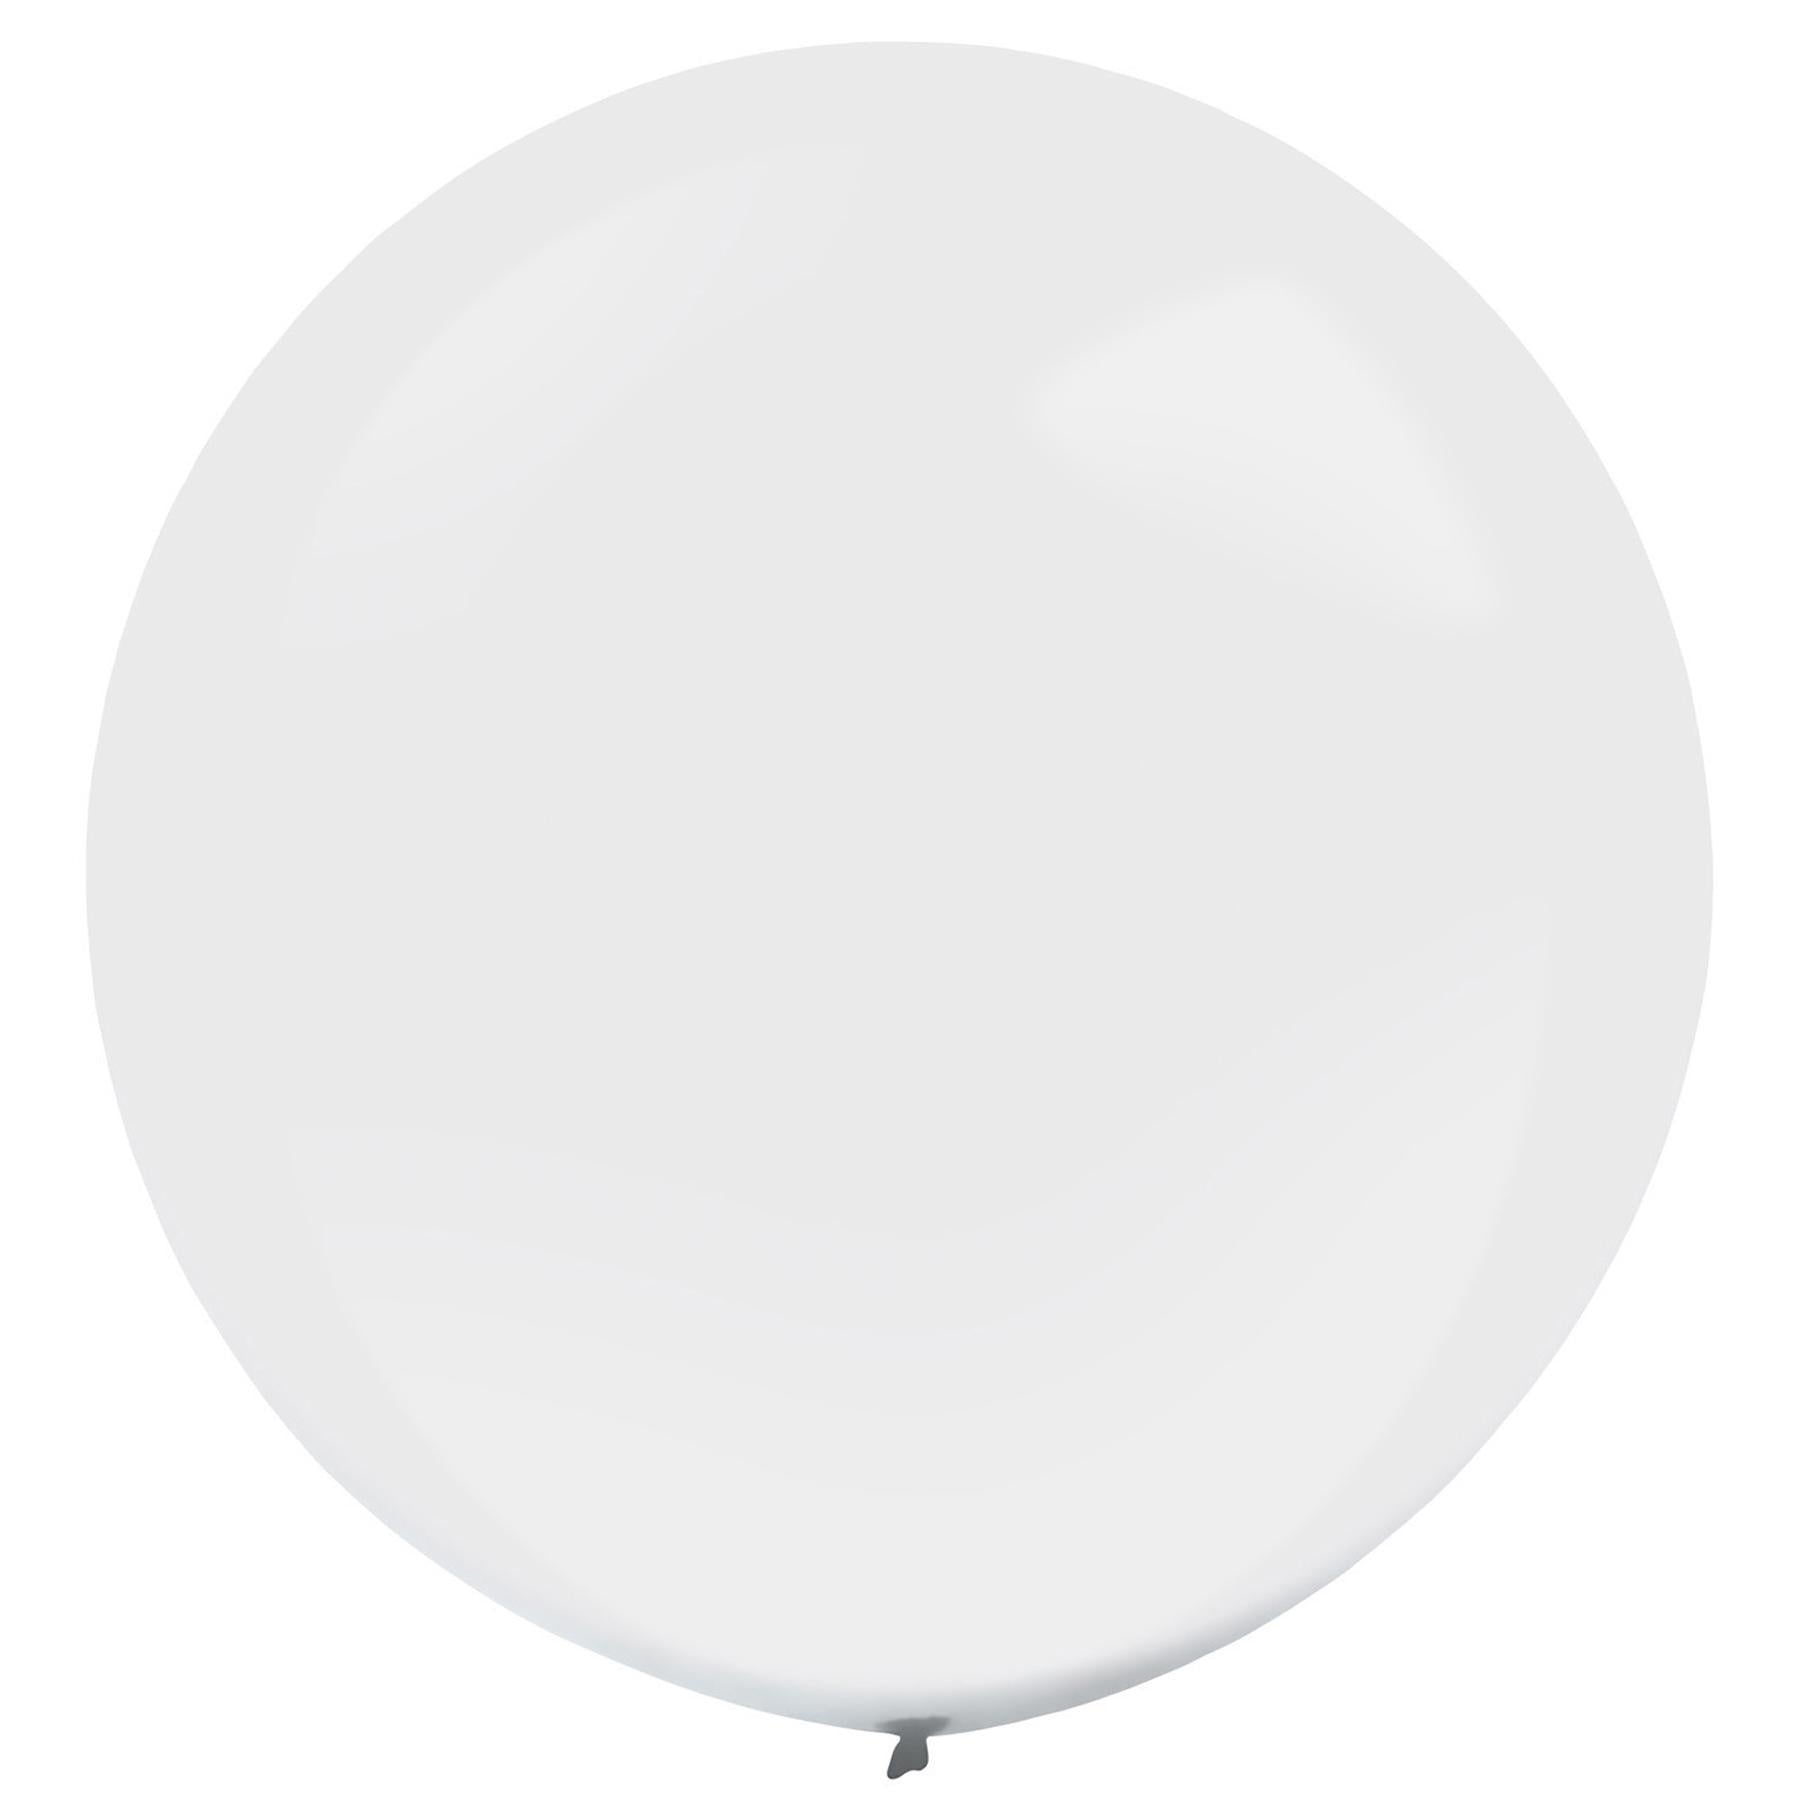 Frosty White Standard Latex Balloons 3ft Balloons & Streamers - Party Centre - Party Centre